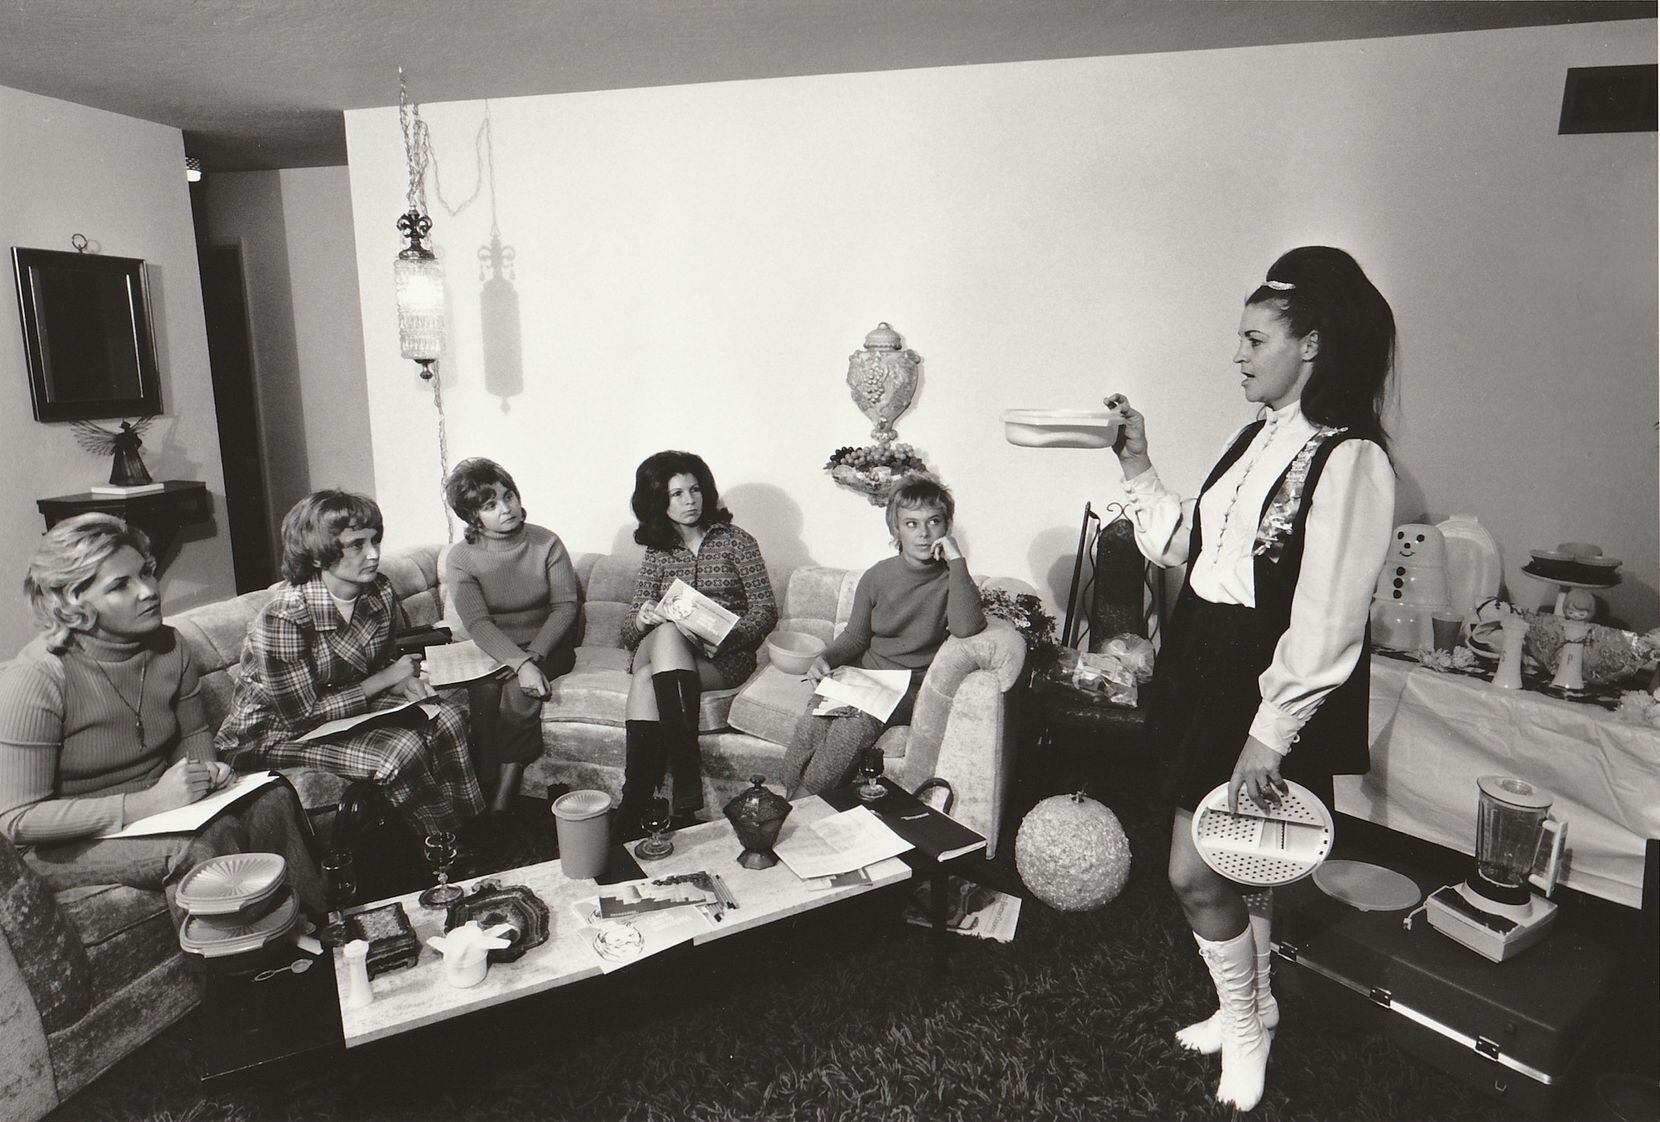 Bill Owens' "Tupperware Party" captures a moment in suburban Livermore, Calif., in 1968. (Courtesy of PDNB Gallery, Dallas)